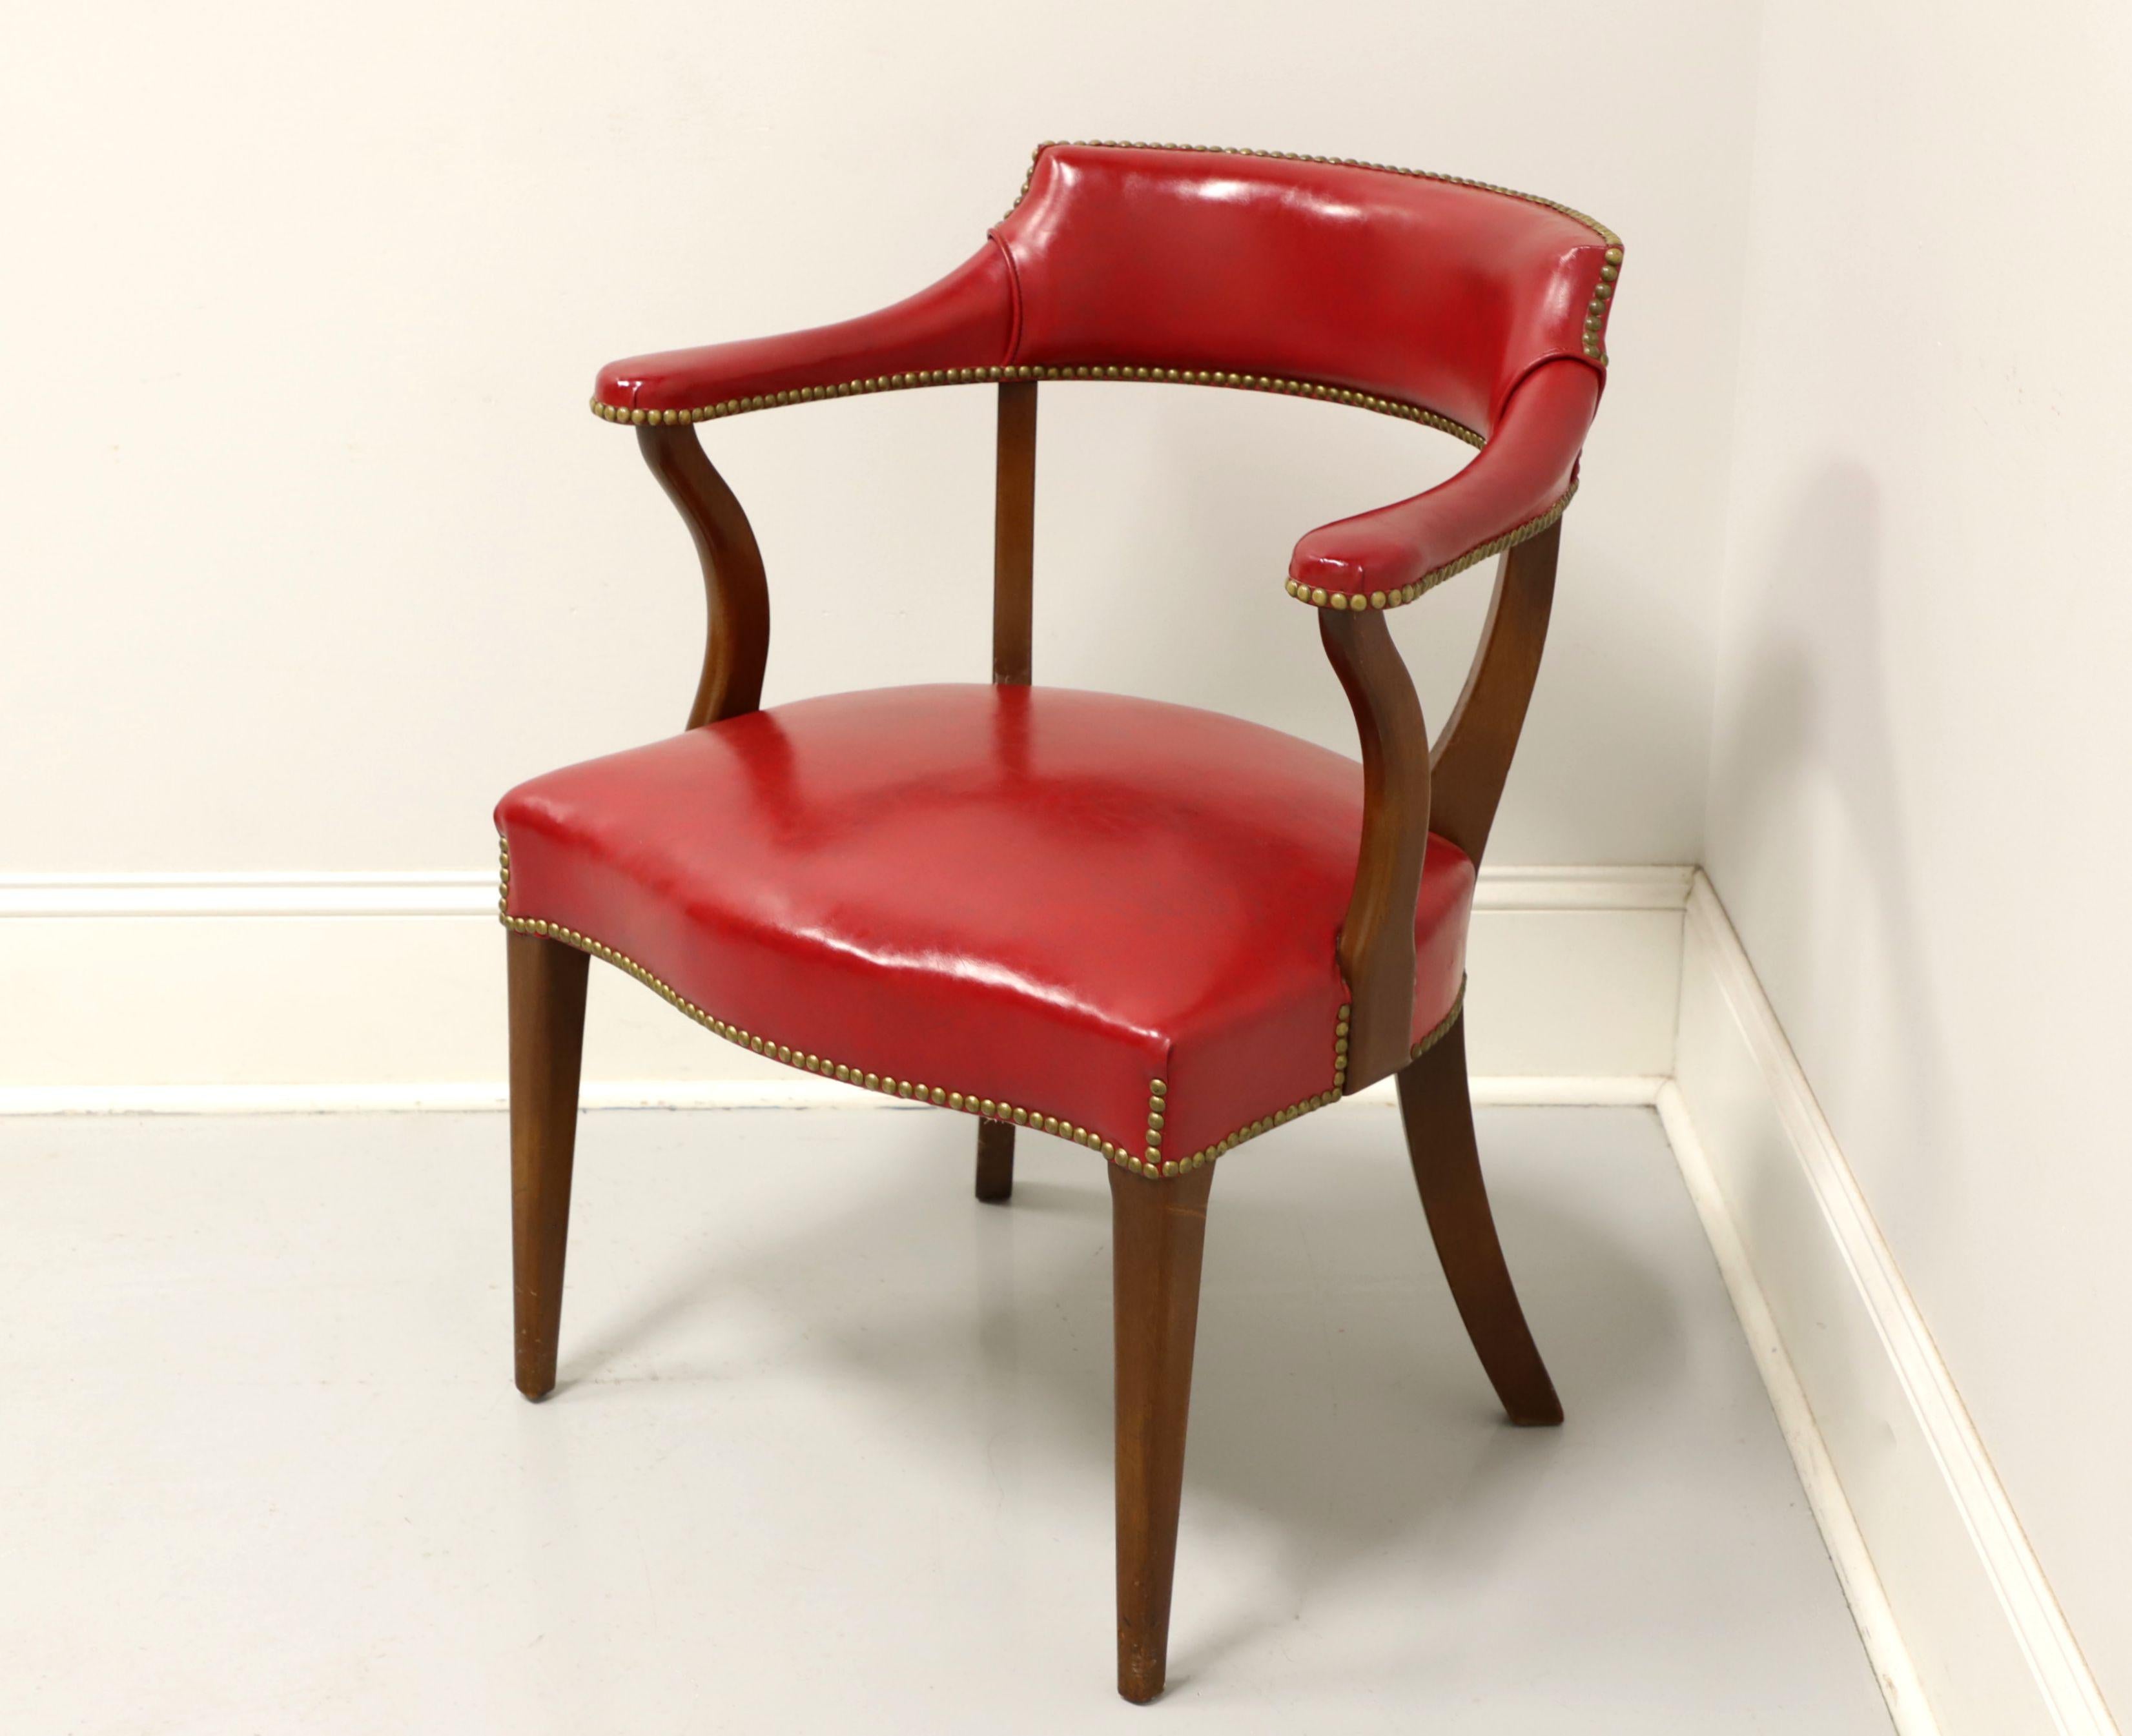 Other HICKORY CHAIR Mid 20th Century Red Faux Leather Library / Office Chair - A